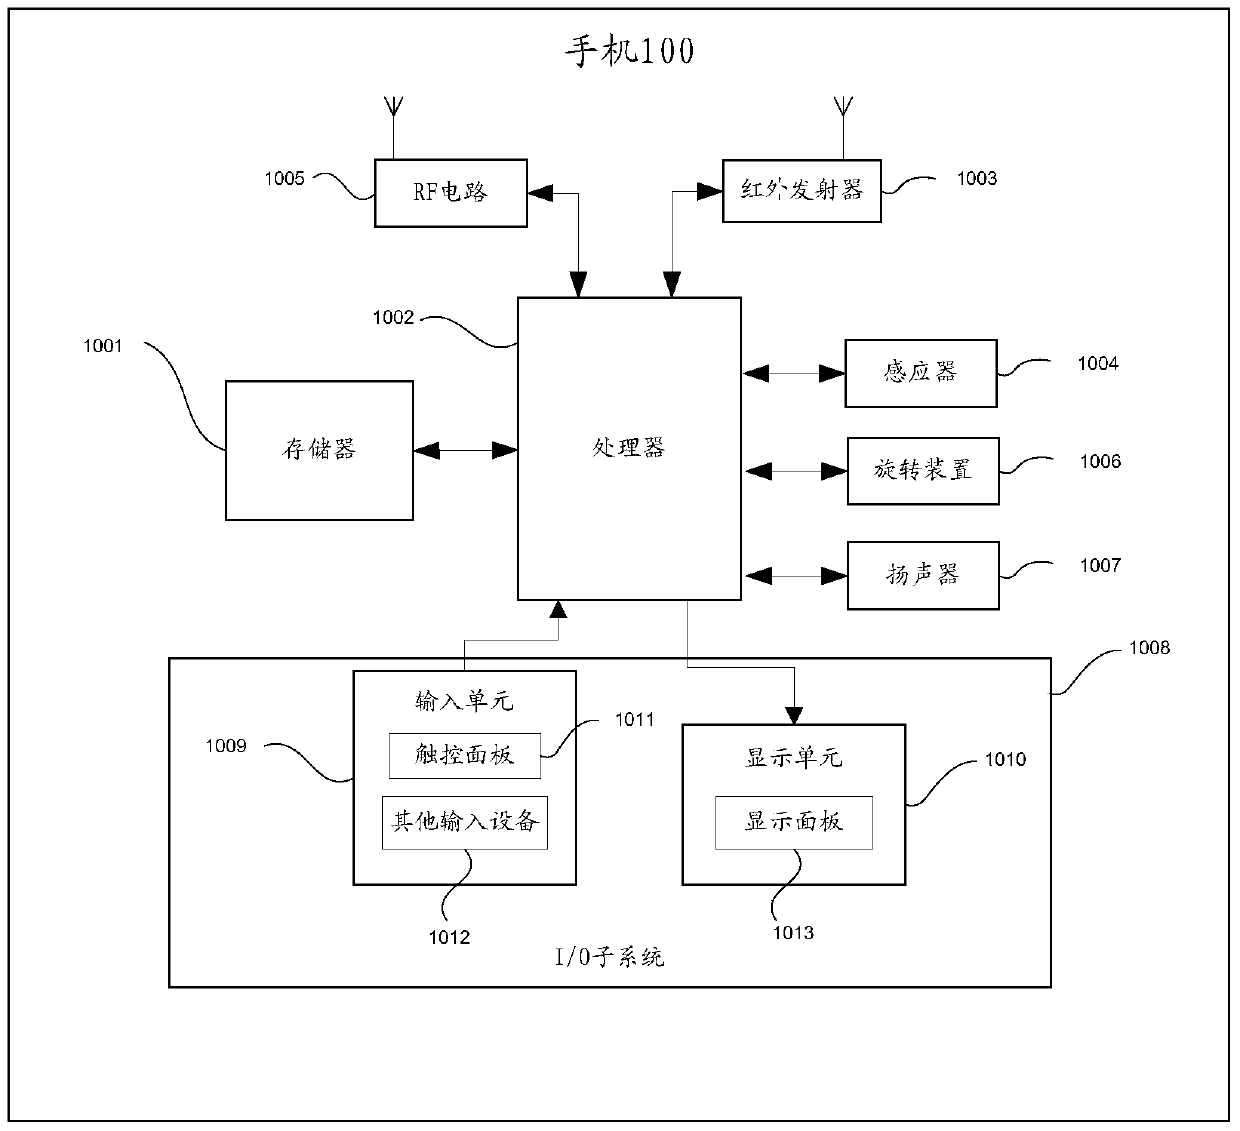 Terminal with infrared remote control function, and infrared remote control pairing method